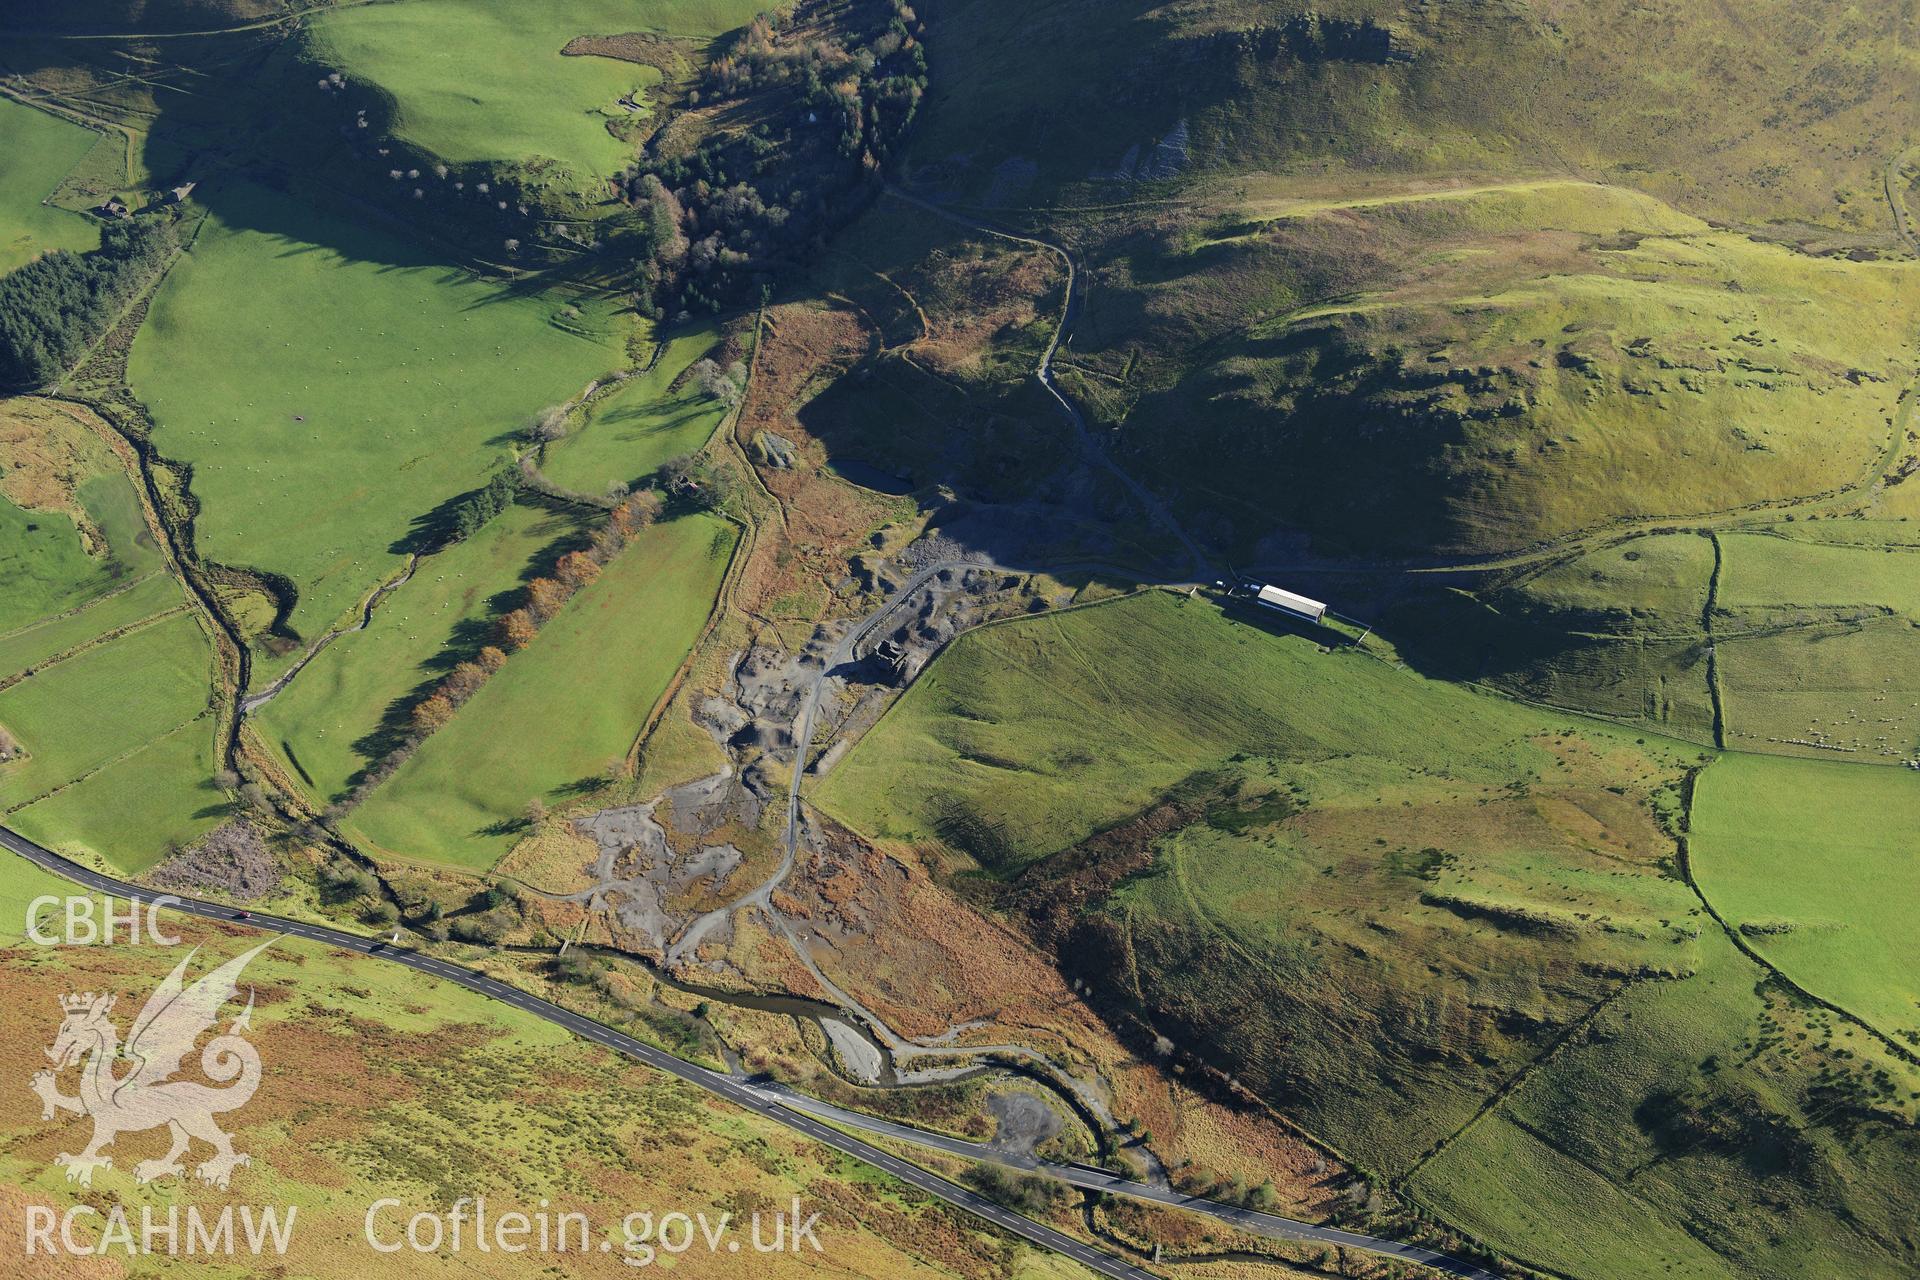 RCAHMW colour oblique photograph of Castell Mine, lead mine. Taken by Toby Driver on 05/11/2012.